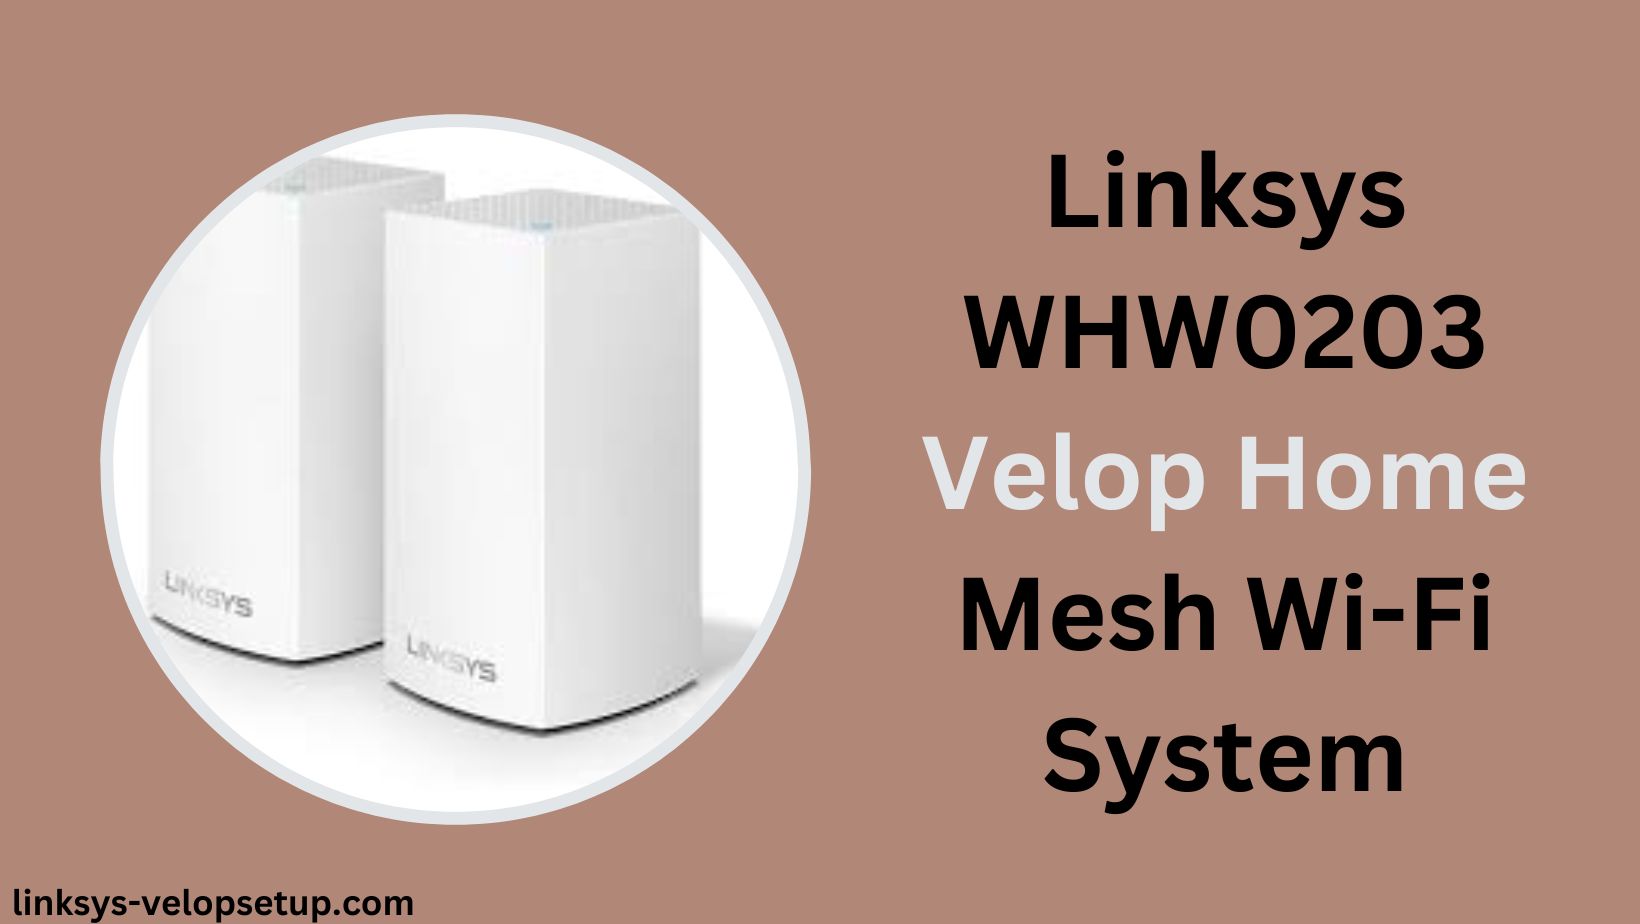 You are currently viewing The Ultimate Guide to Optimising Your Linksys WHW0203 Velop Home Mesh Wi-Fi System